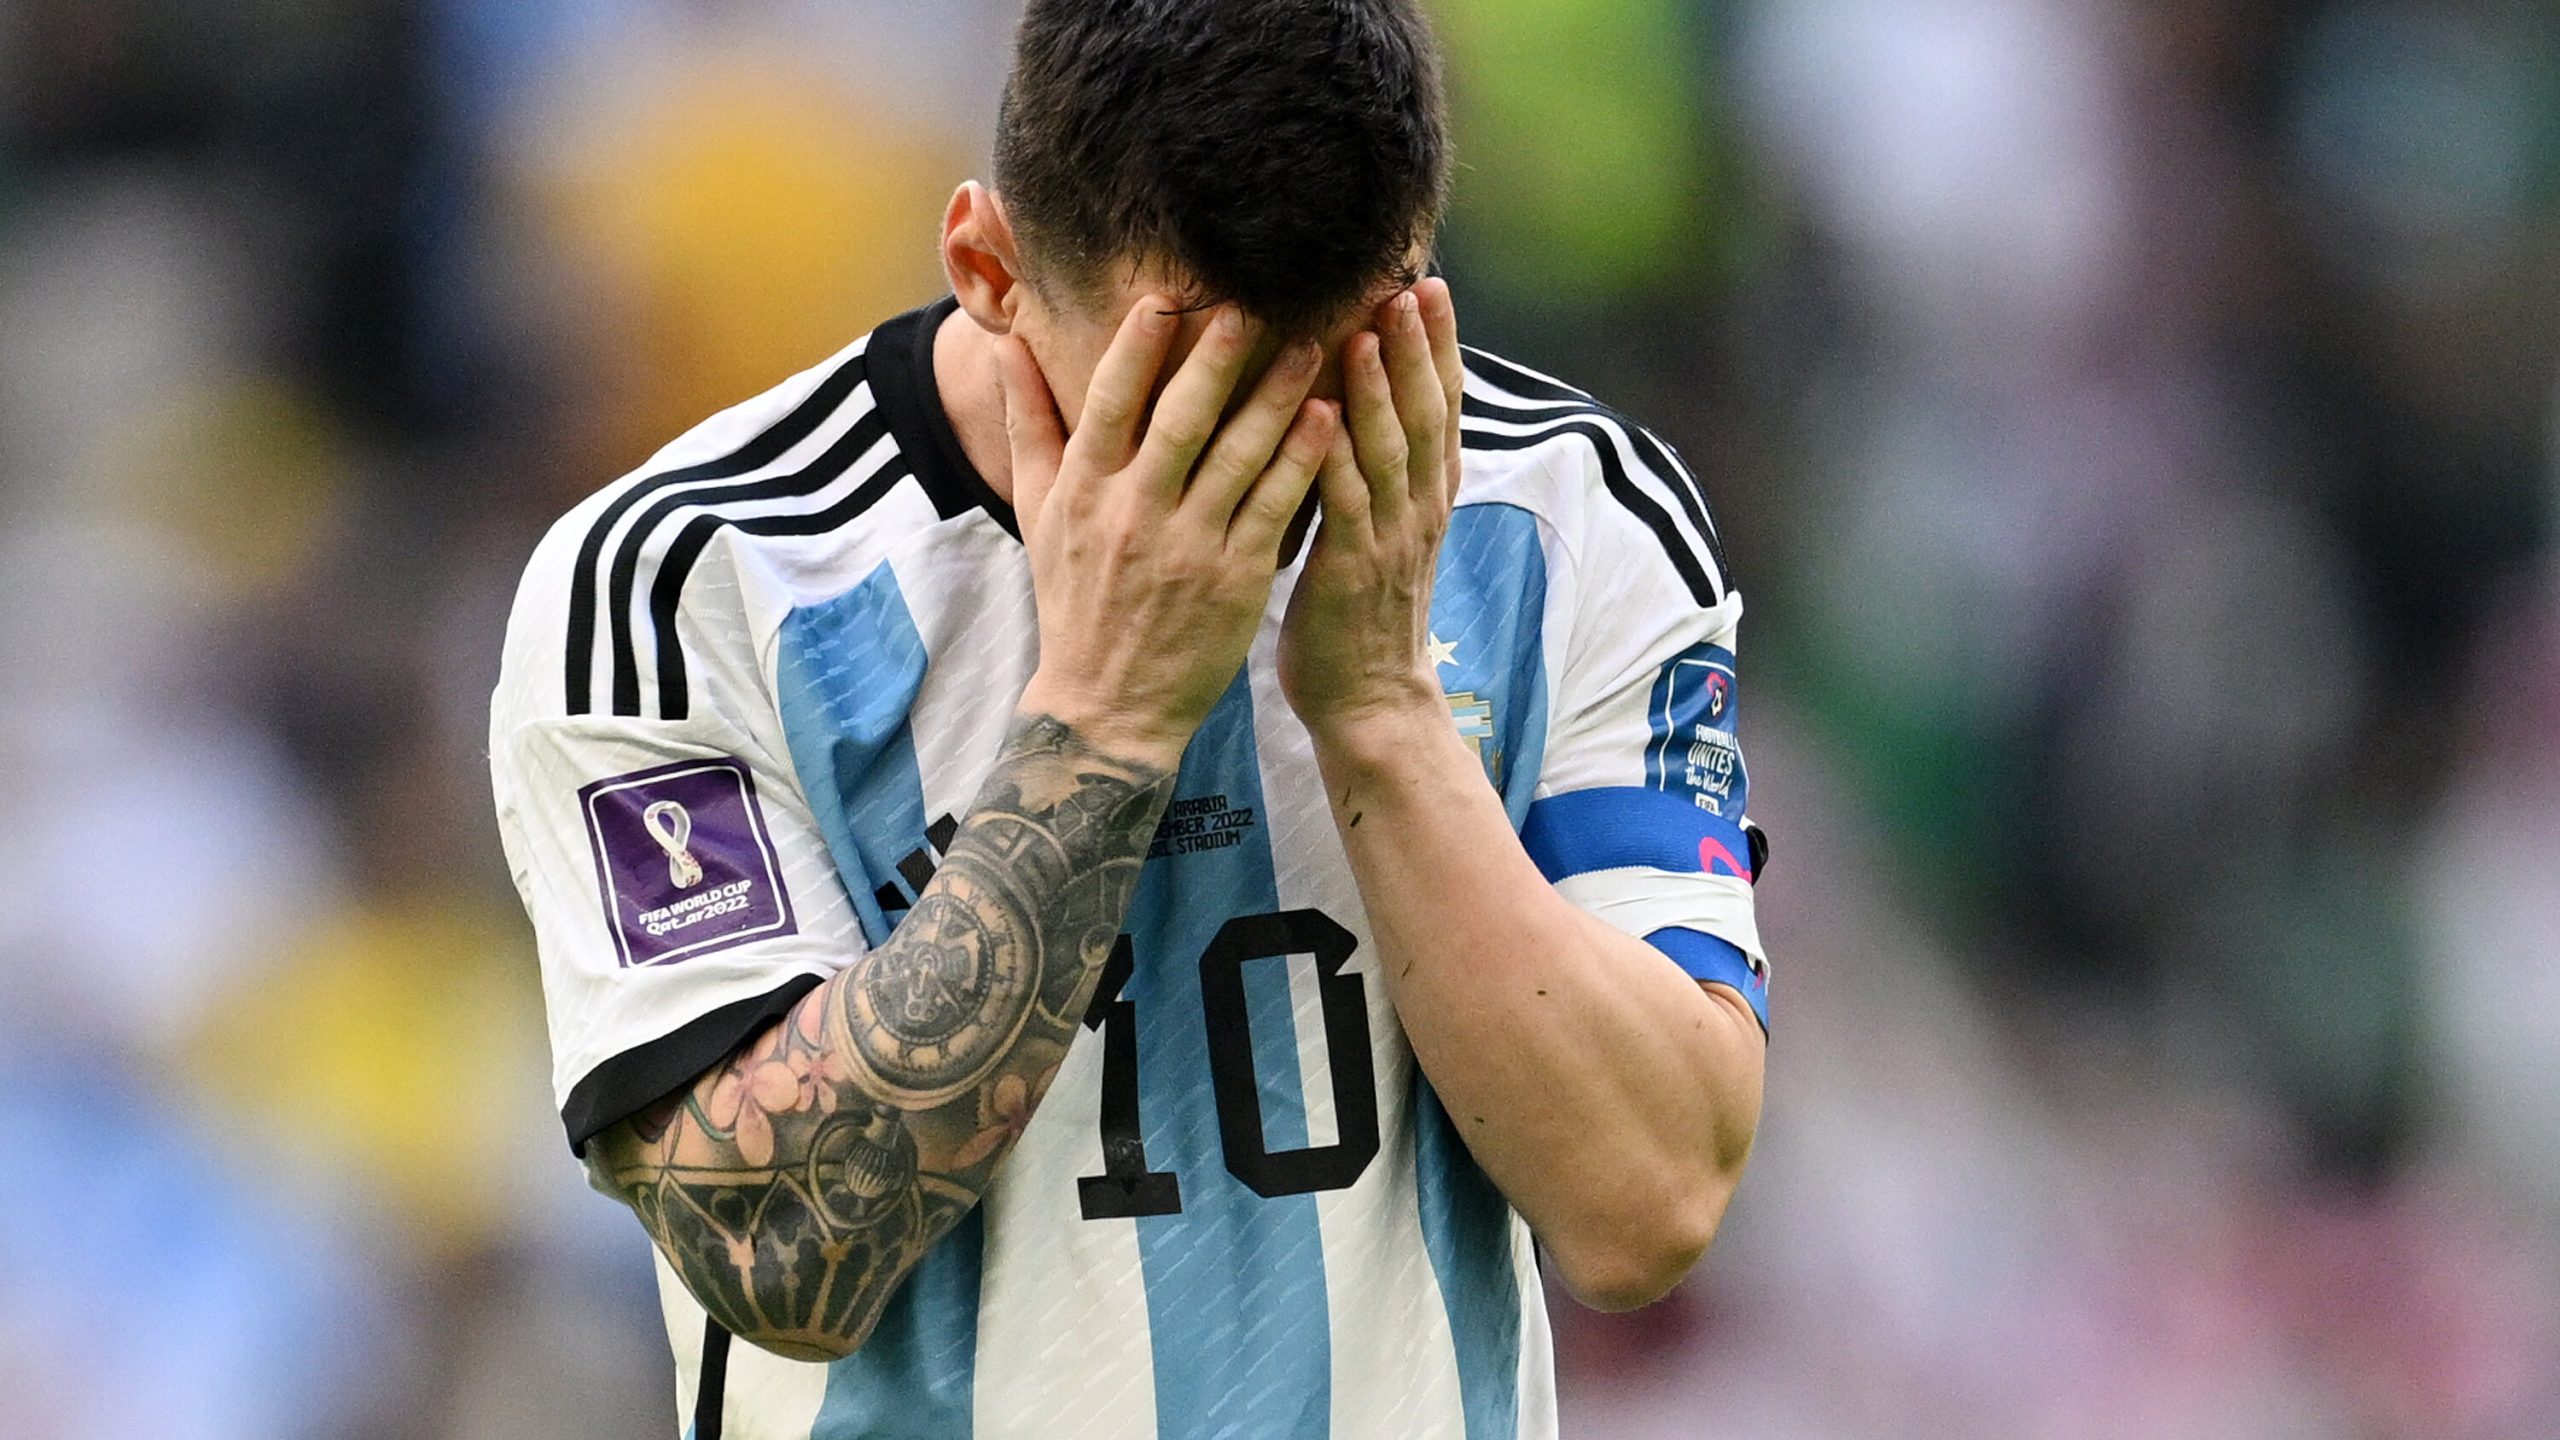 FIFA World Cup: Argentina, Germany Fall Short Of Expectations – Casino.org